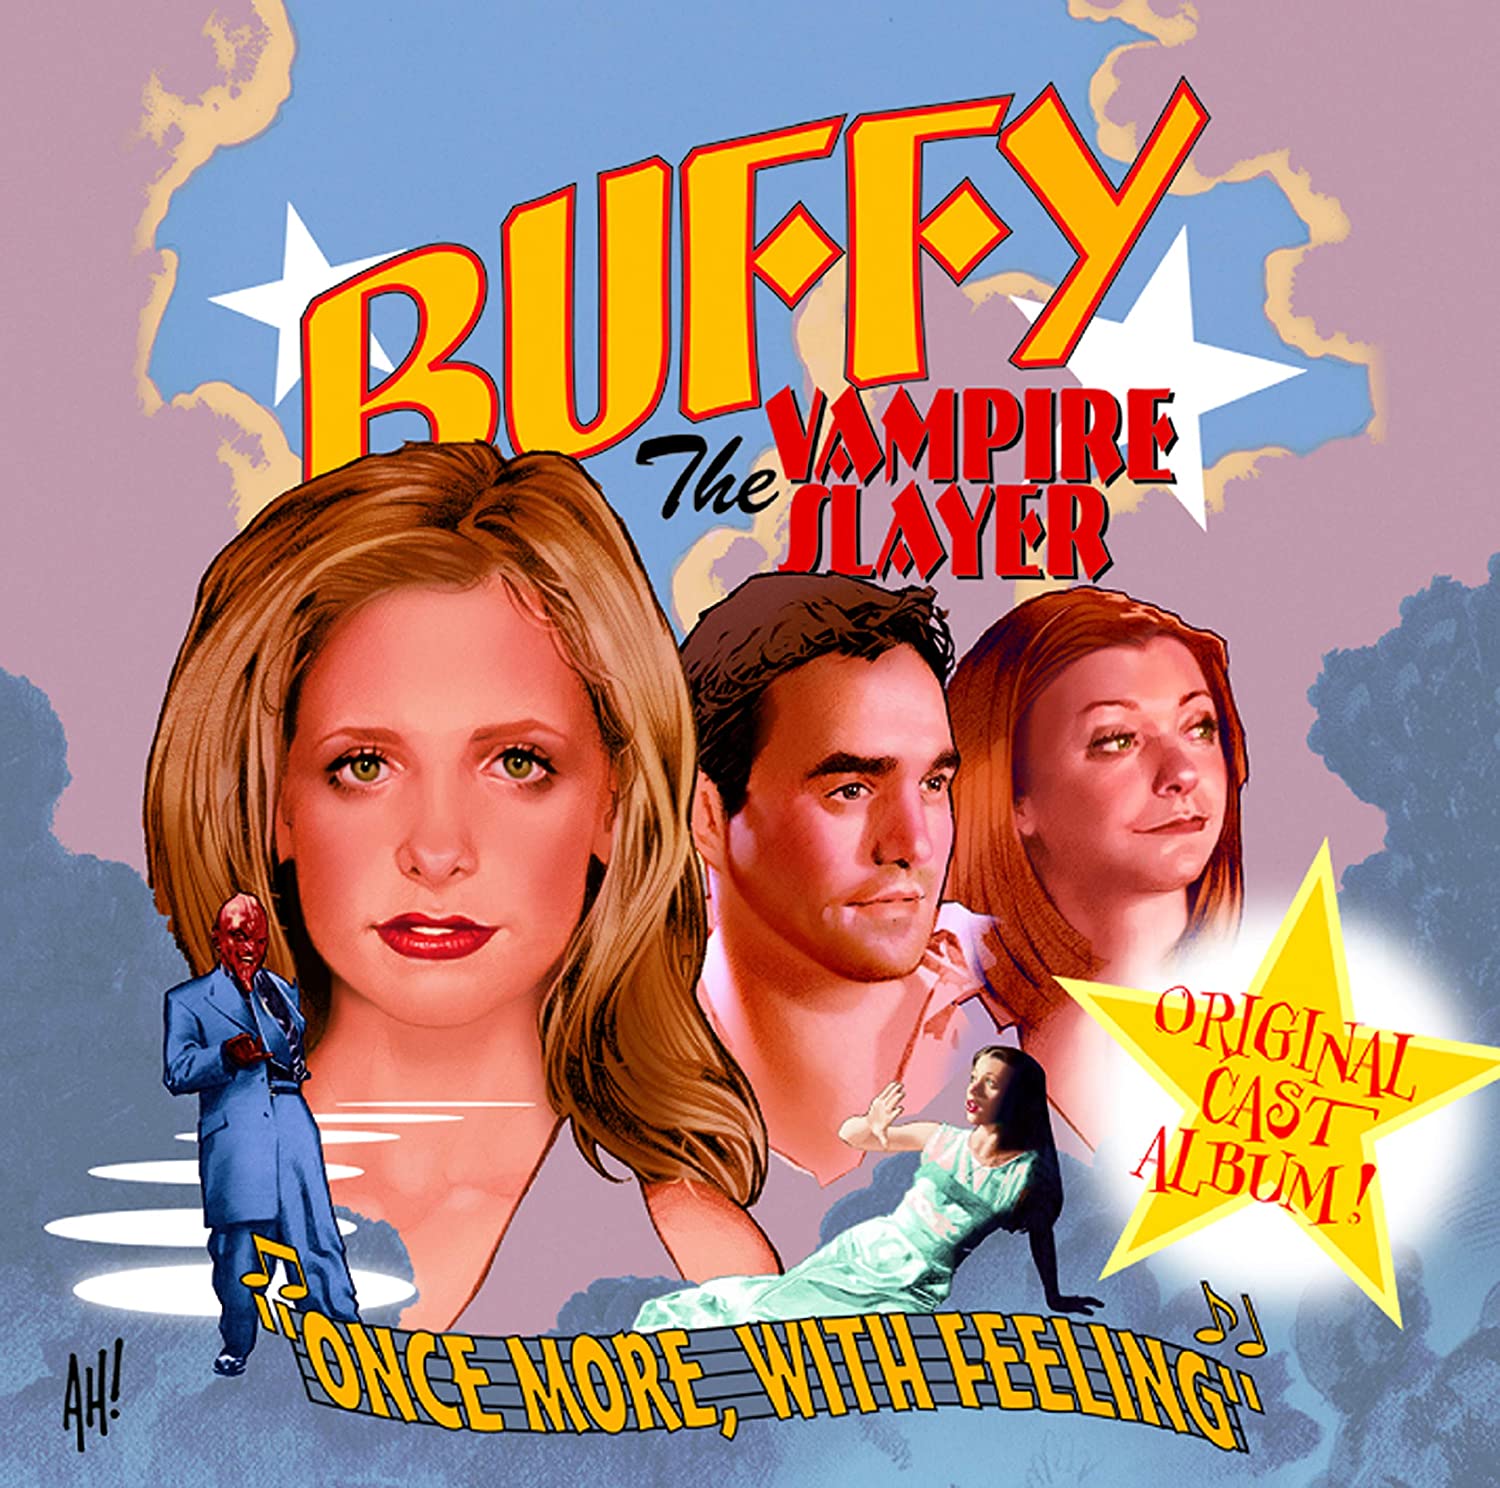 Buffy "Once more with feeling" version 2